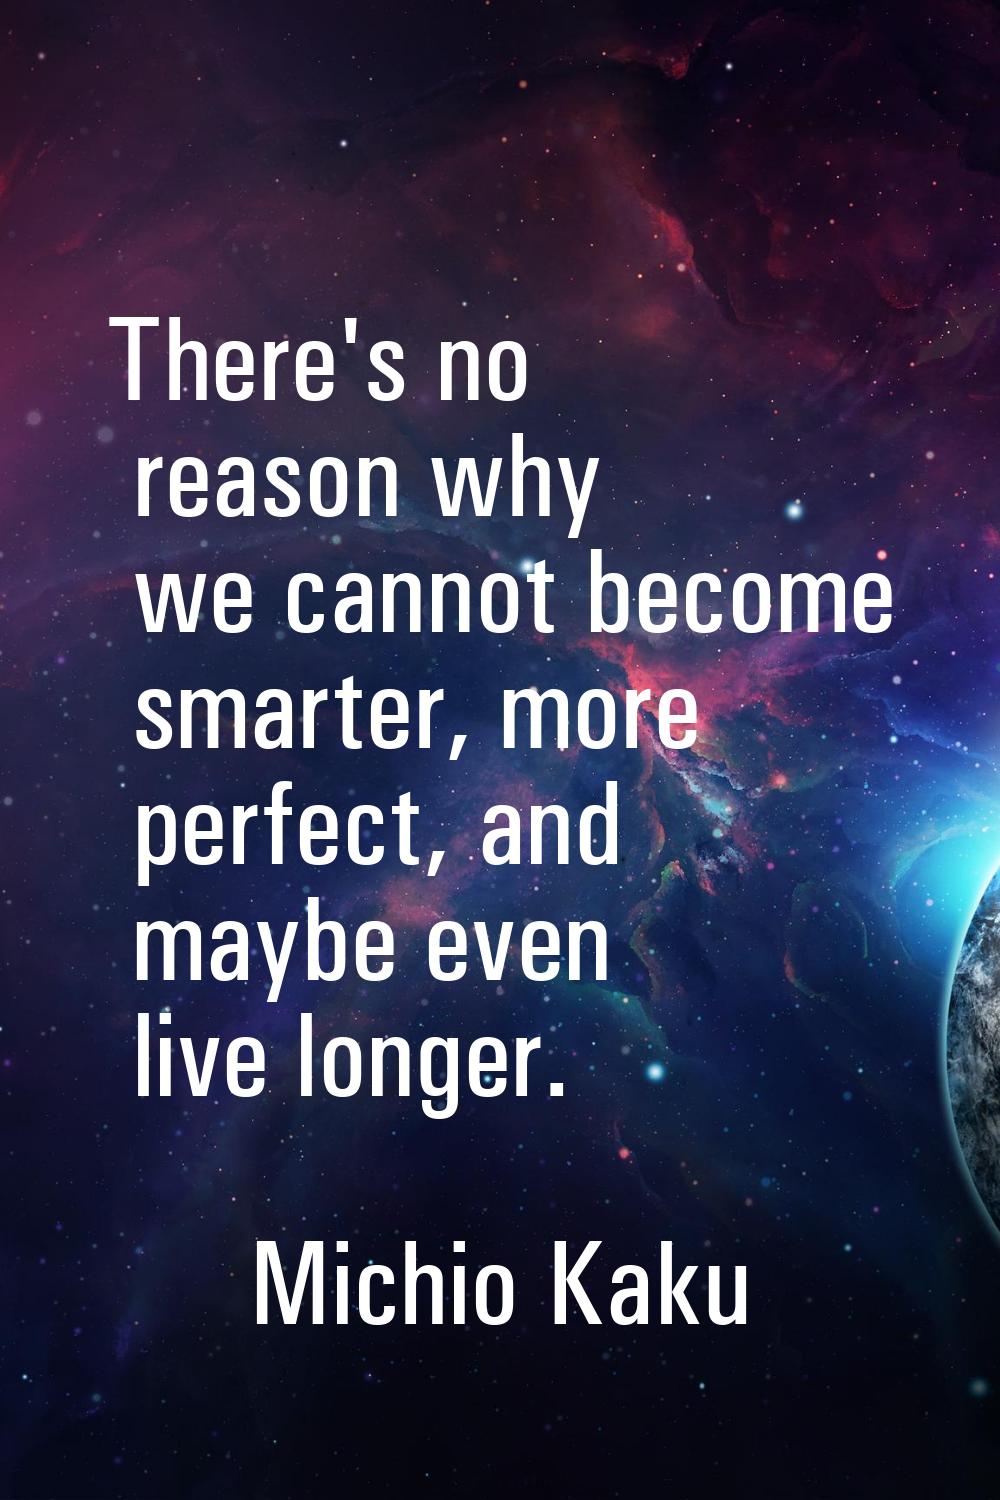 There's no reason why we cannot become smarter, more perfect, and maybe even live longer.